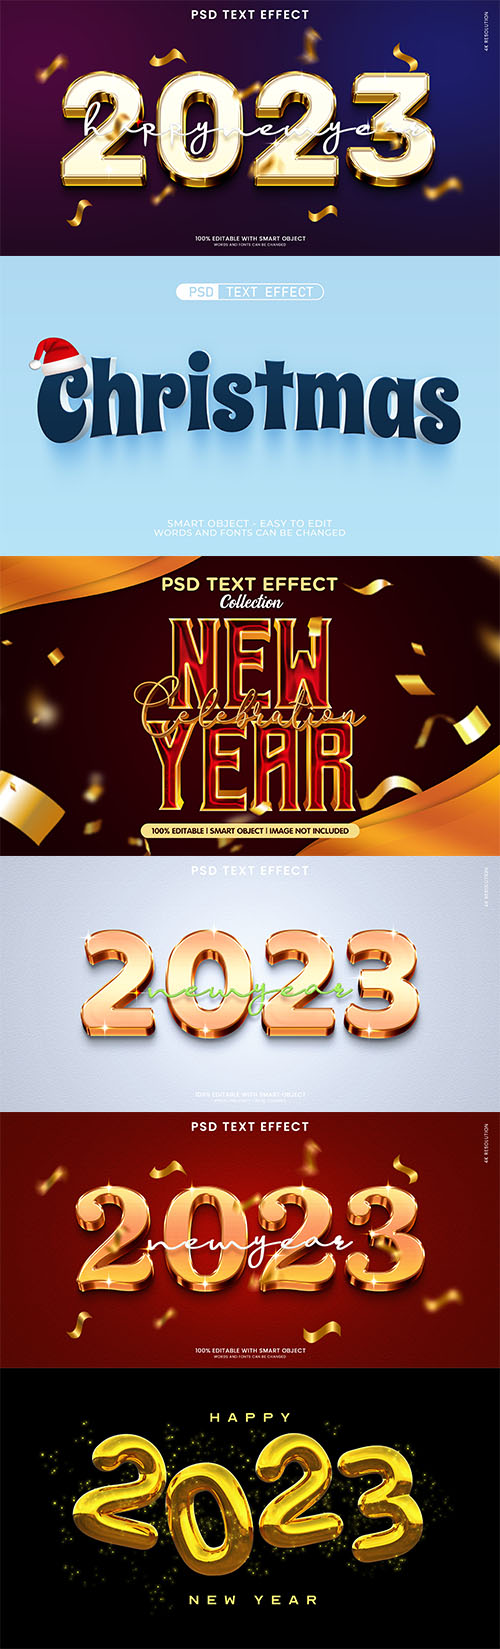 Christmas and new year 2023 celebration text effect psd